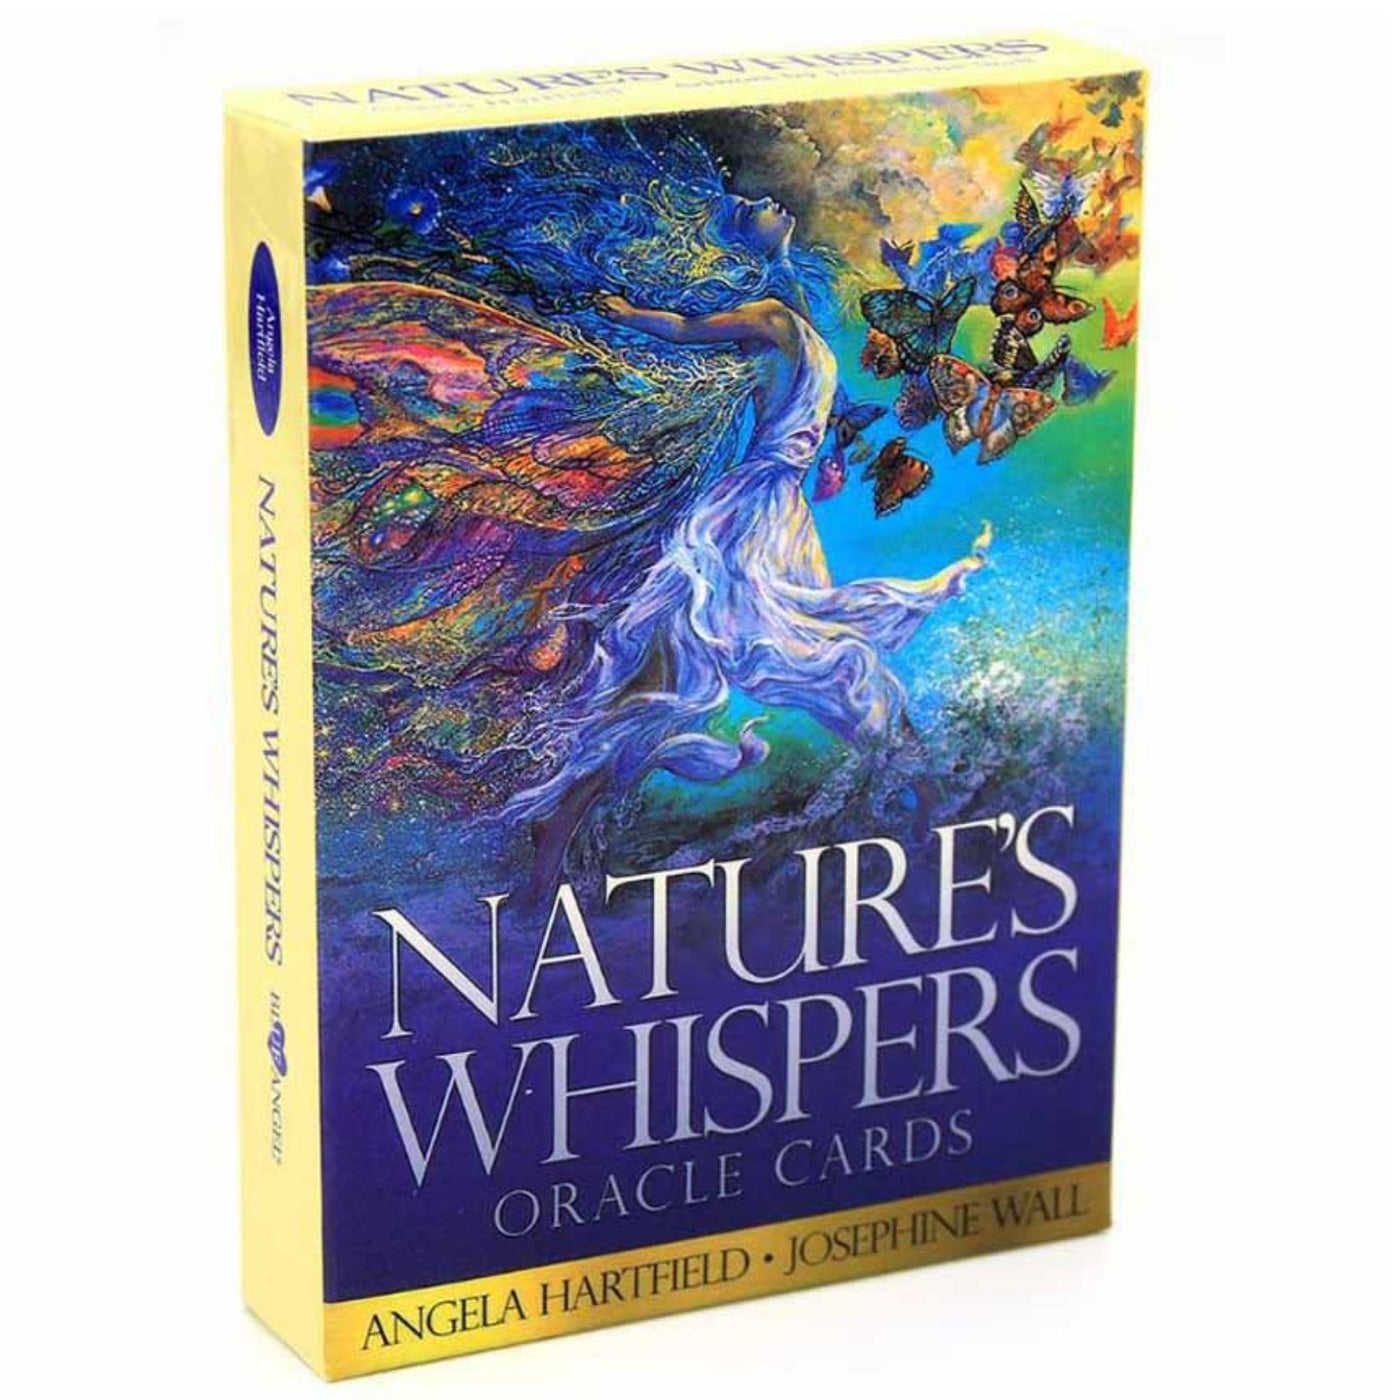 Nature's whispers